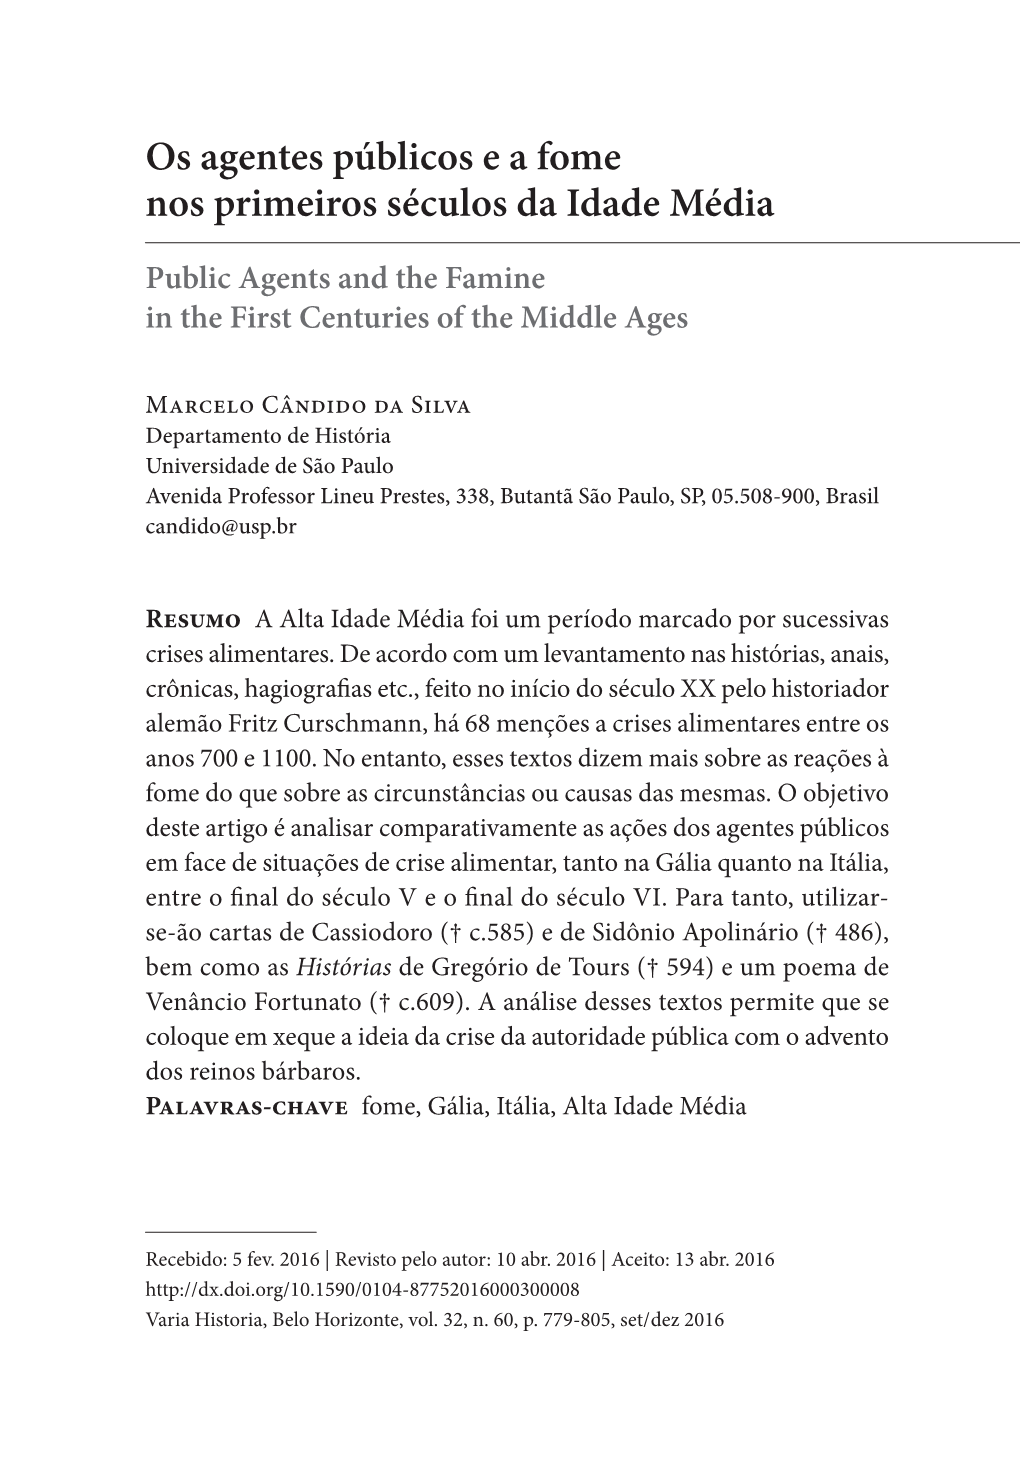 Public Agents and the Famine in the First Centuries of the Middle Ages